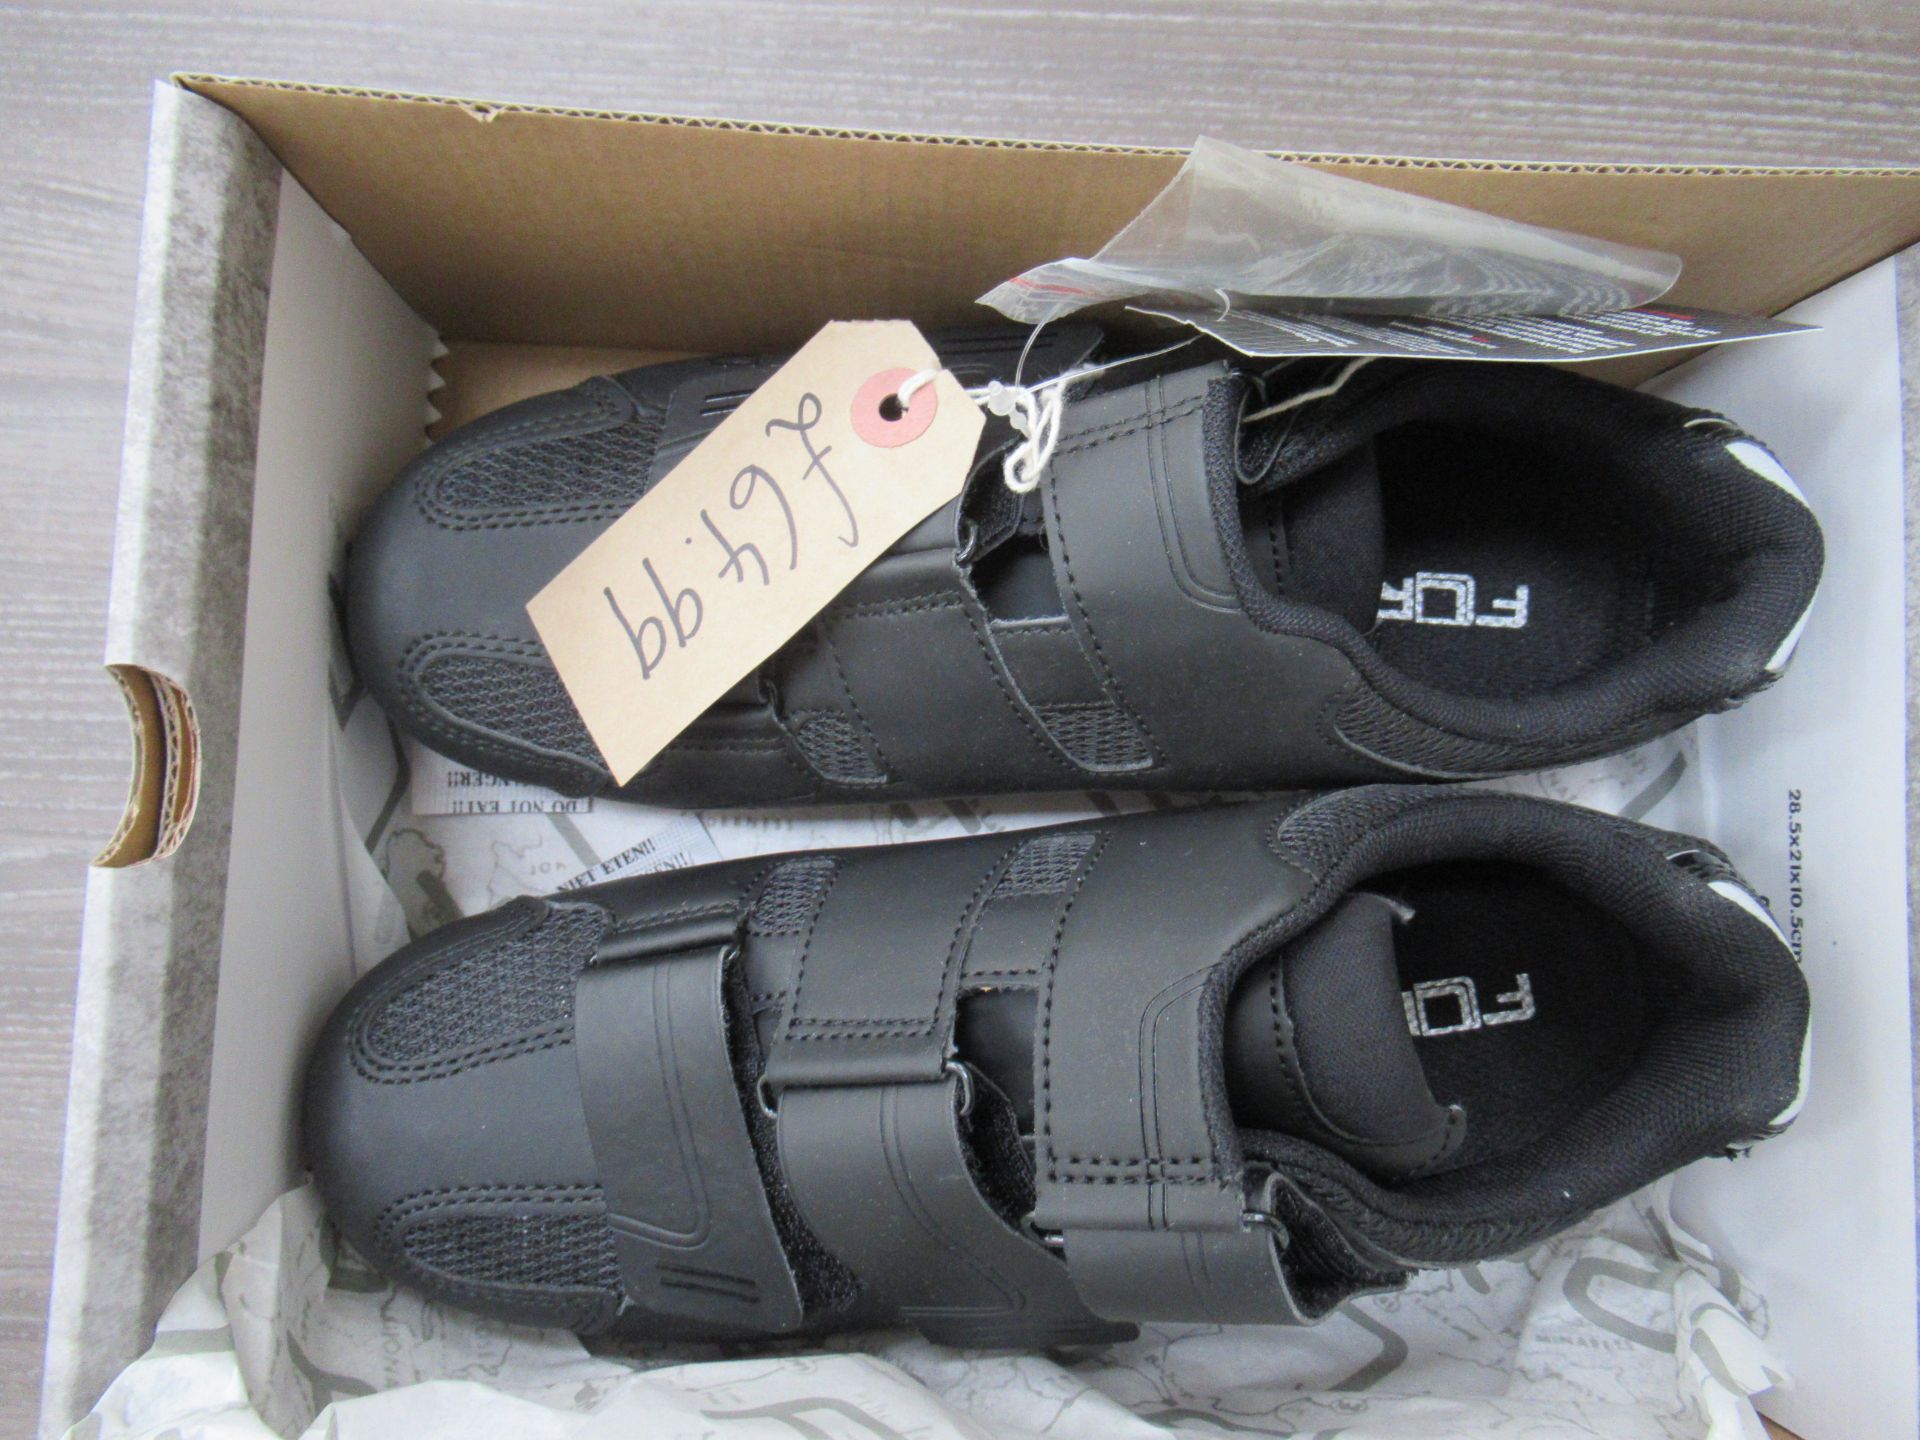 2 x Pairs of FLR cycling shoes - 1 x F-11 boxed EU size 39 (RRP£99.99) and 1 x F-35 III boxed EU siz - Image 3 of 7